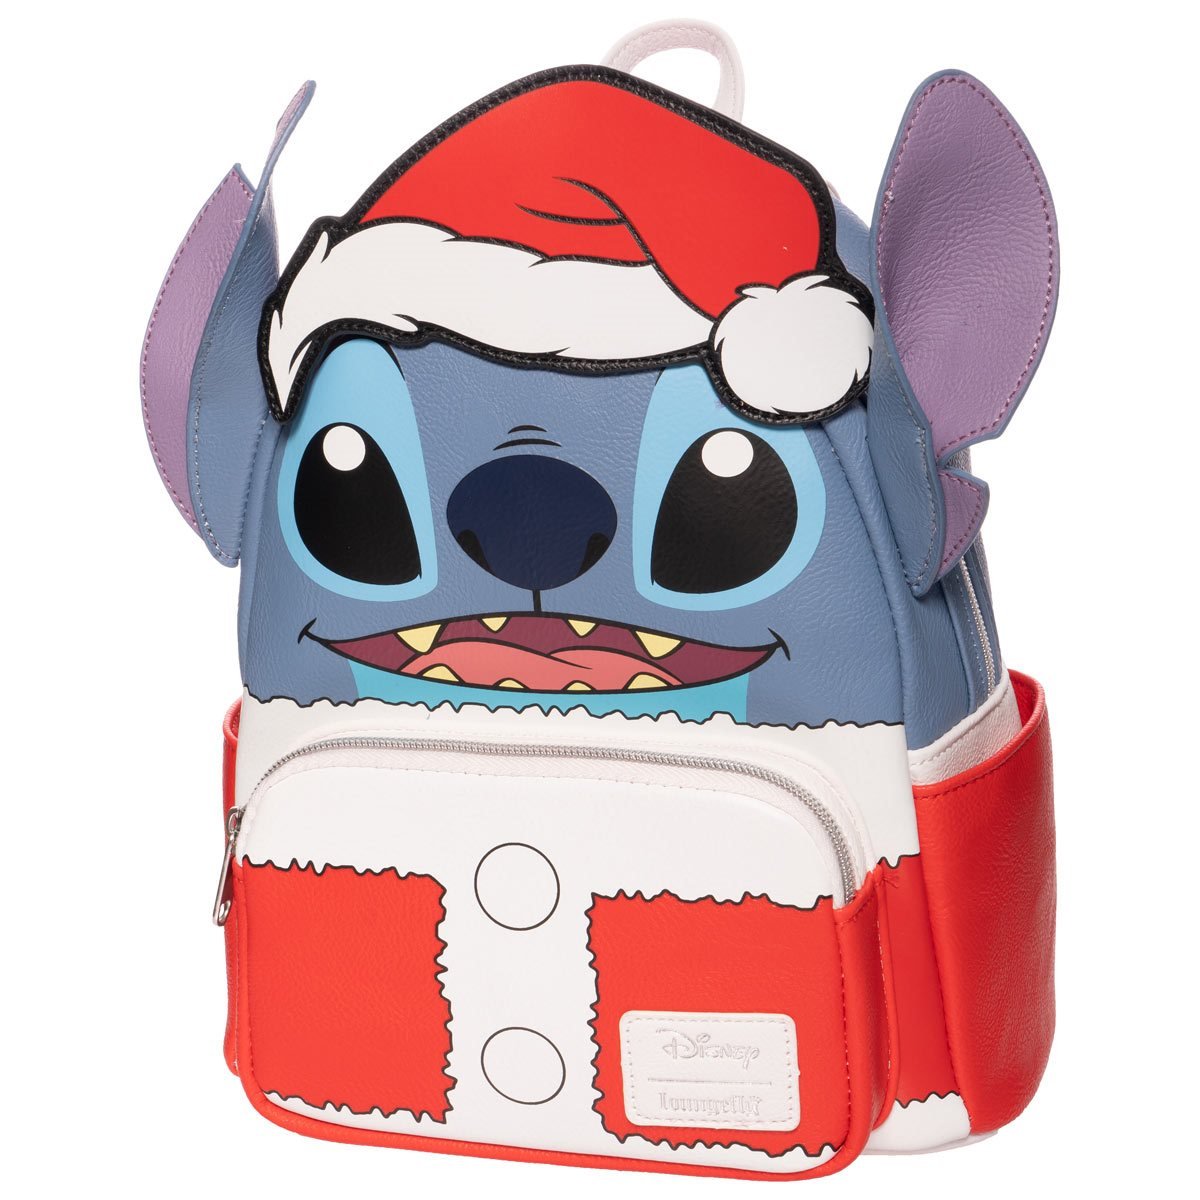 Loungefly Disney Lilo & Stitch Santa Stitch Mini Backpack - Entertainment Earth Ex - Loungefly mini backpack alternate side view